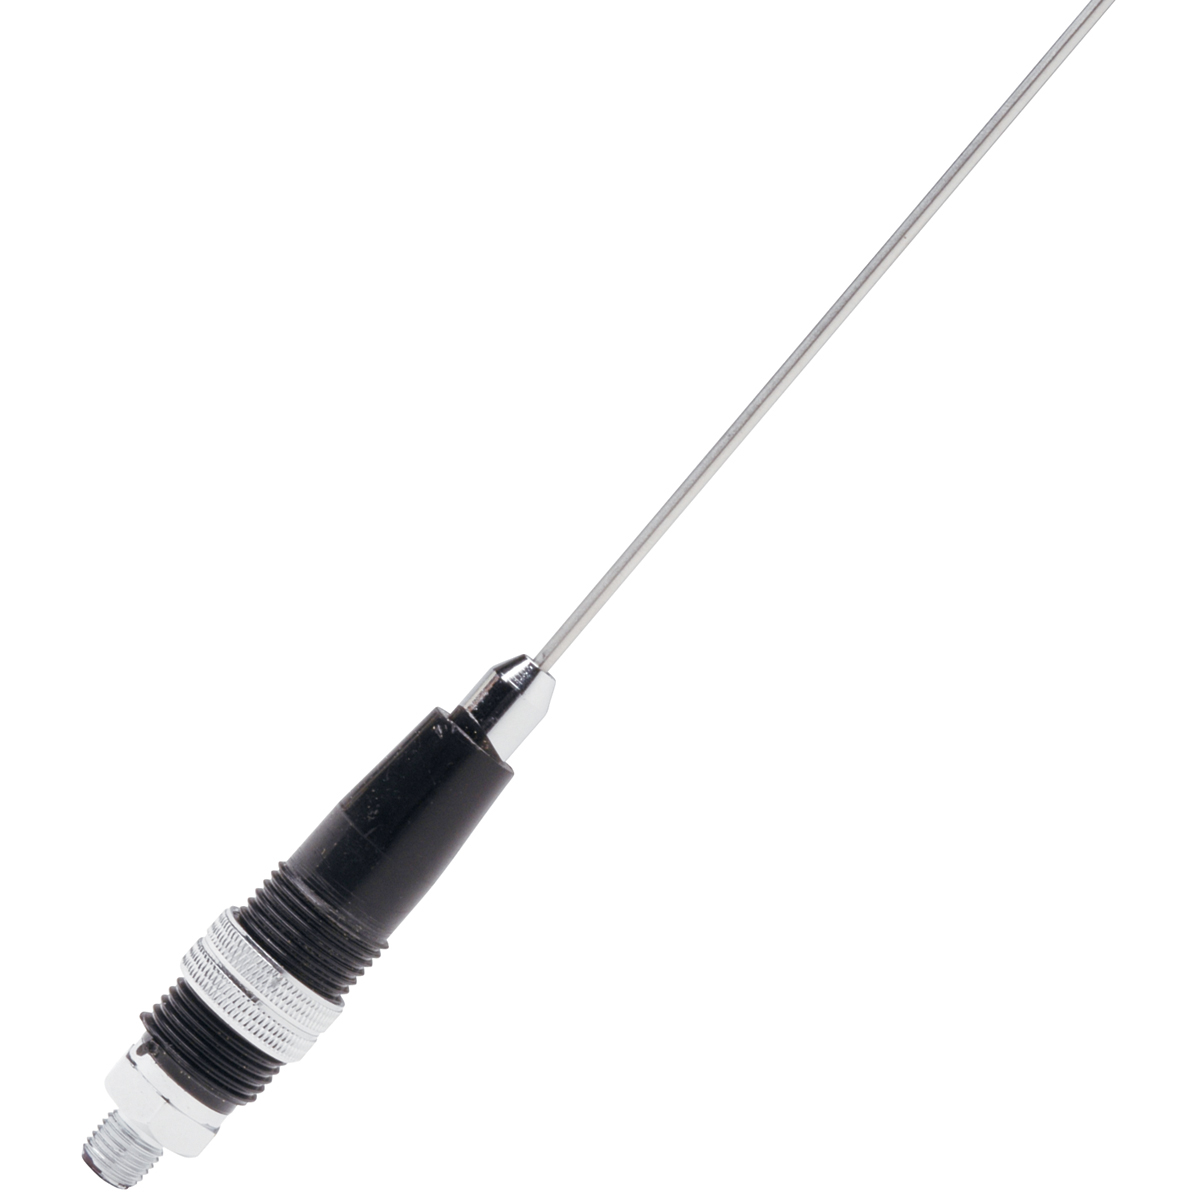 Solarcon A-112 3.5FT Tunable Stainless Steel CB Antenna Whip - 50 Watt 3.5-Foot CB Radio Antenna Whip Universal Fit - Black